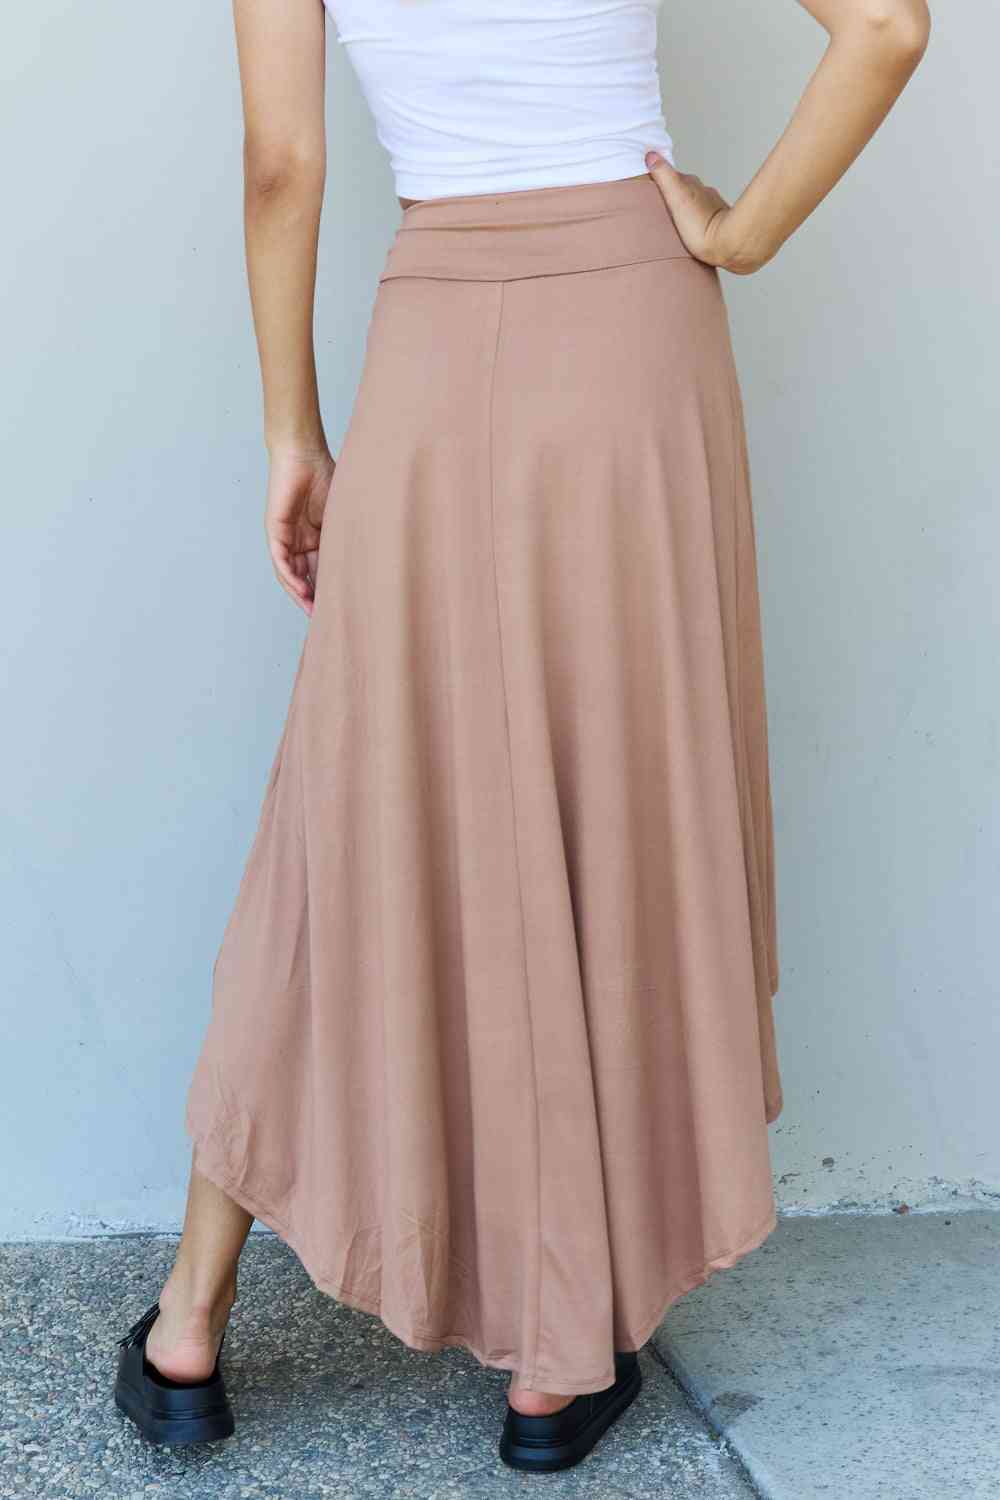 First Choice High Waisted Flare Maxi Skirt in Light Camel  Southern Soul Collectives